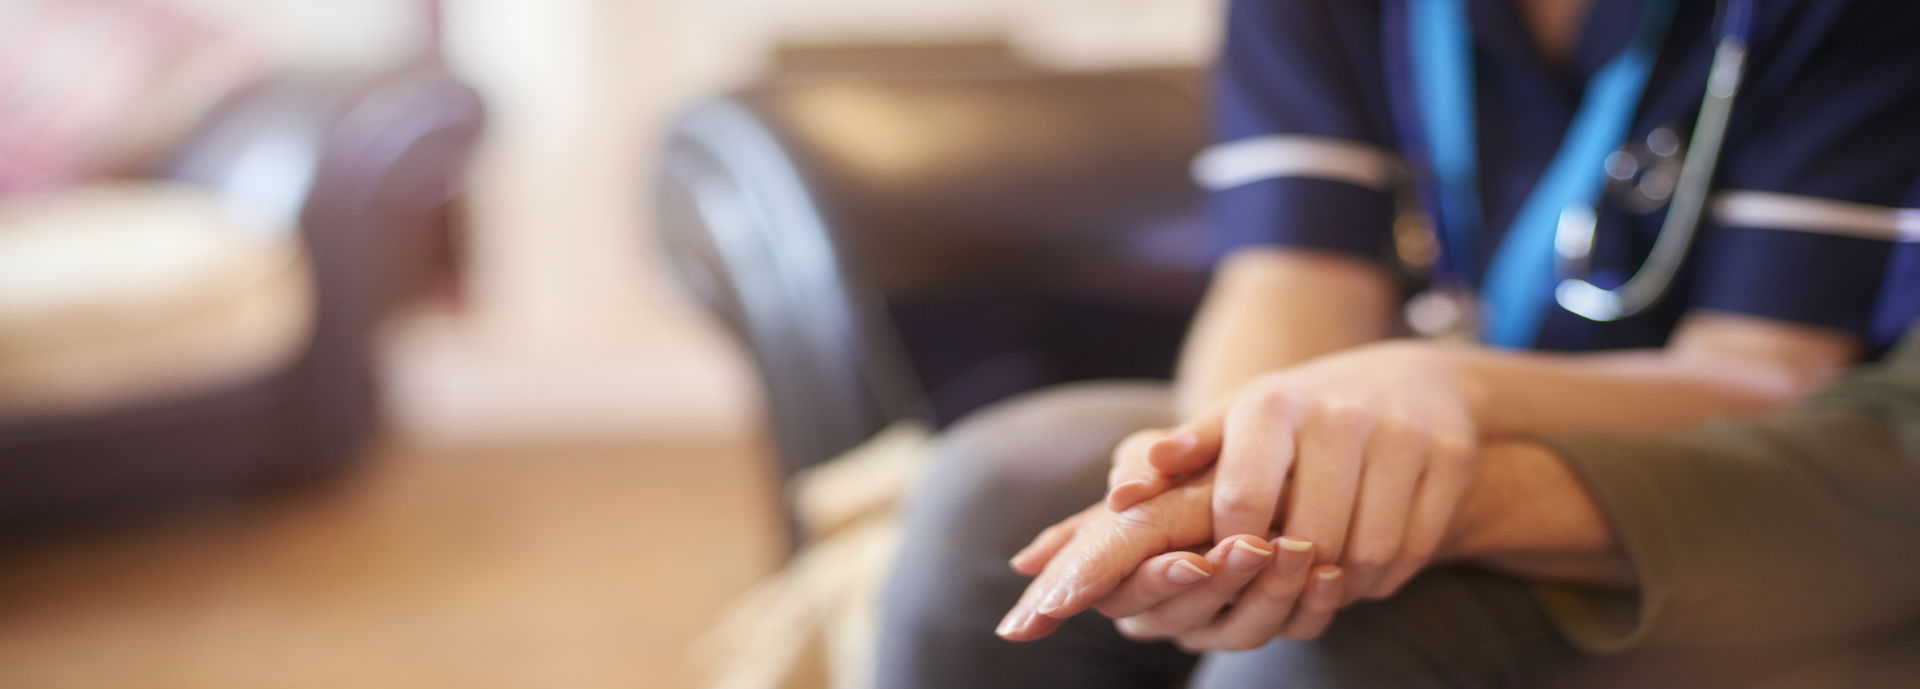 Closeup of a nurses hands holding another person's hand